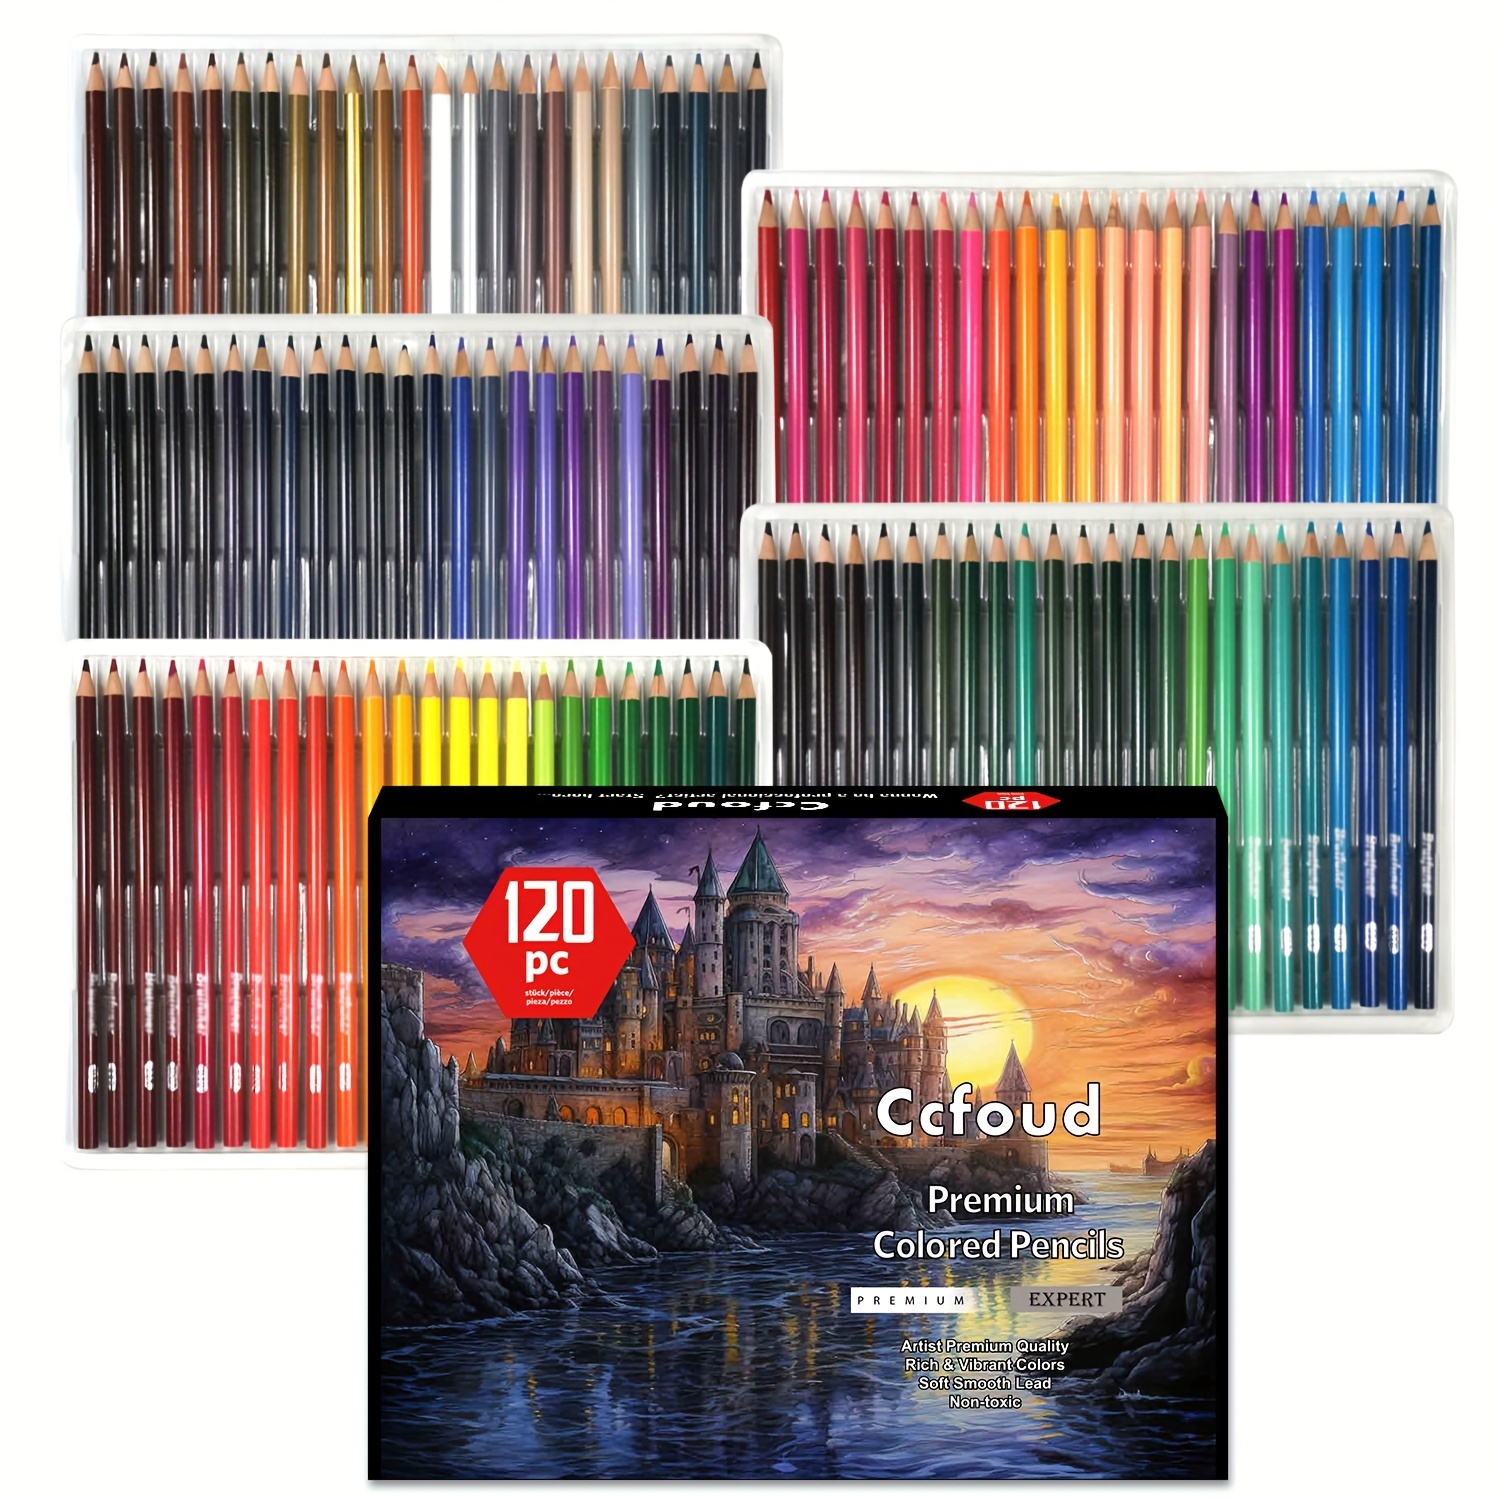 180-Color Artist Colored Pencils Set for Adult Coloring Books